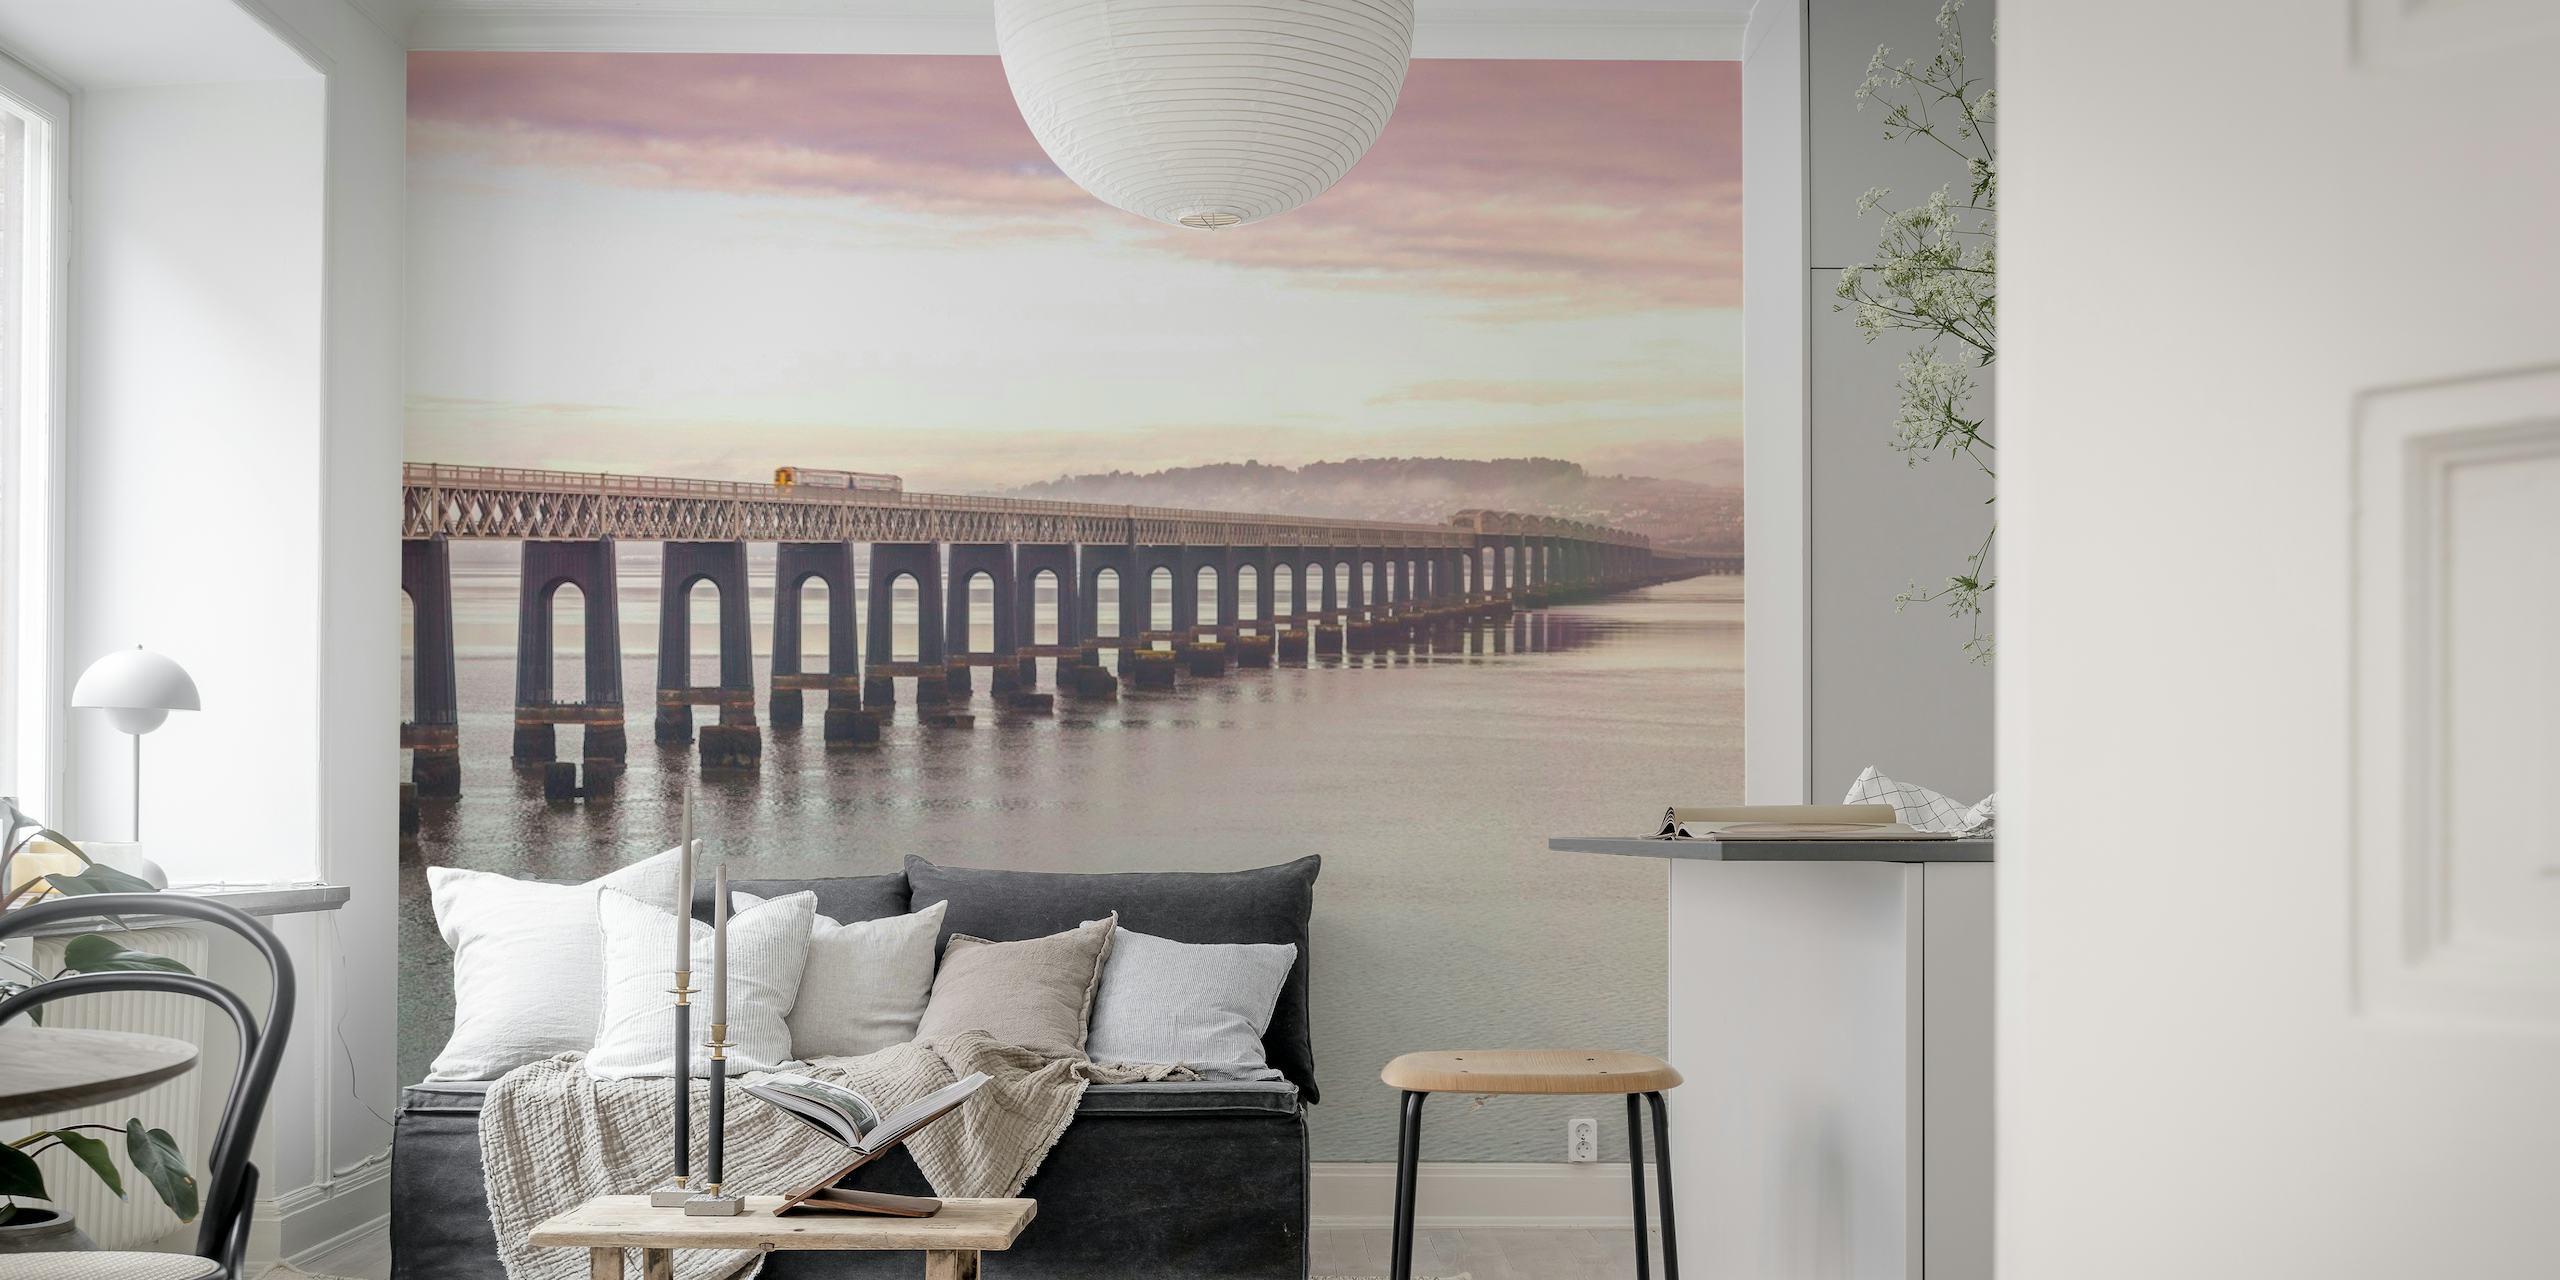 Tay in the Pink wall mural showing a bridge over calm waters at dawn with pink sky